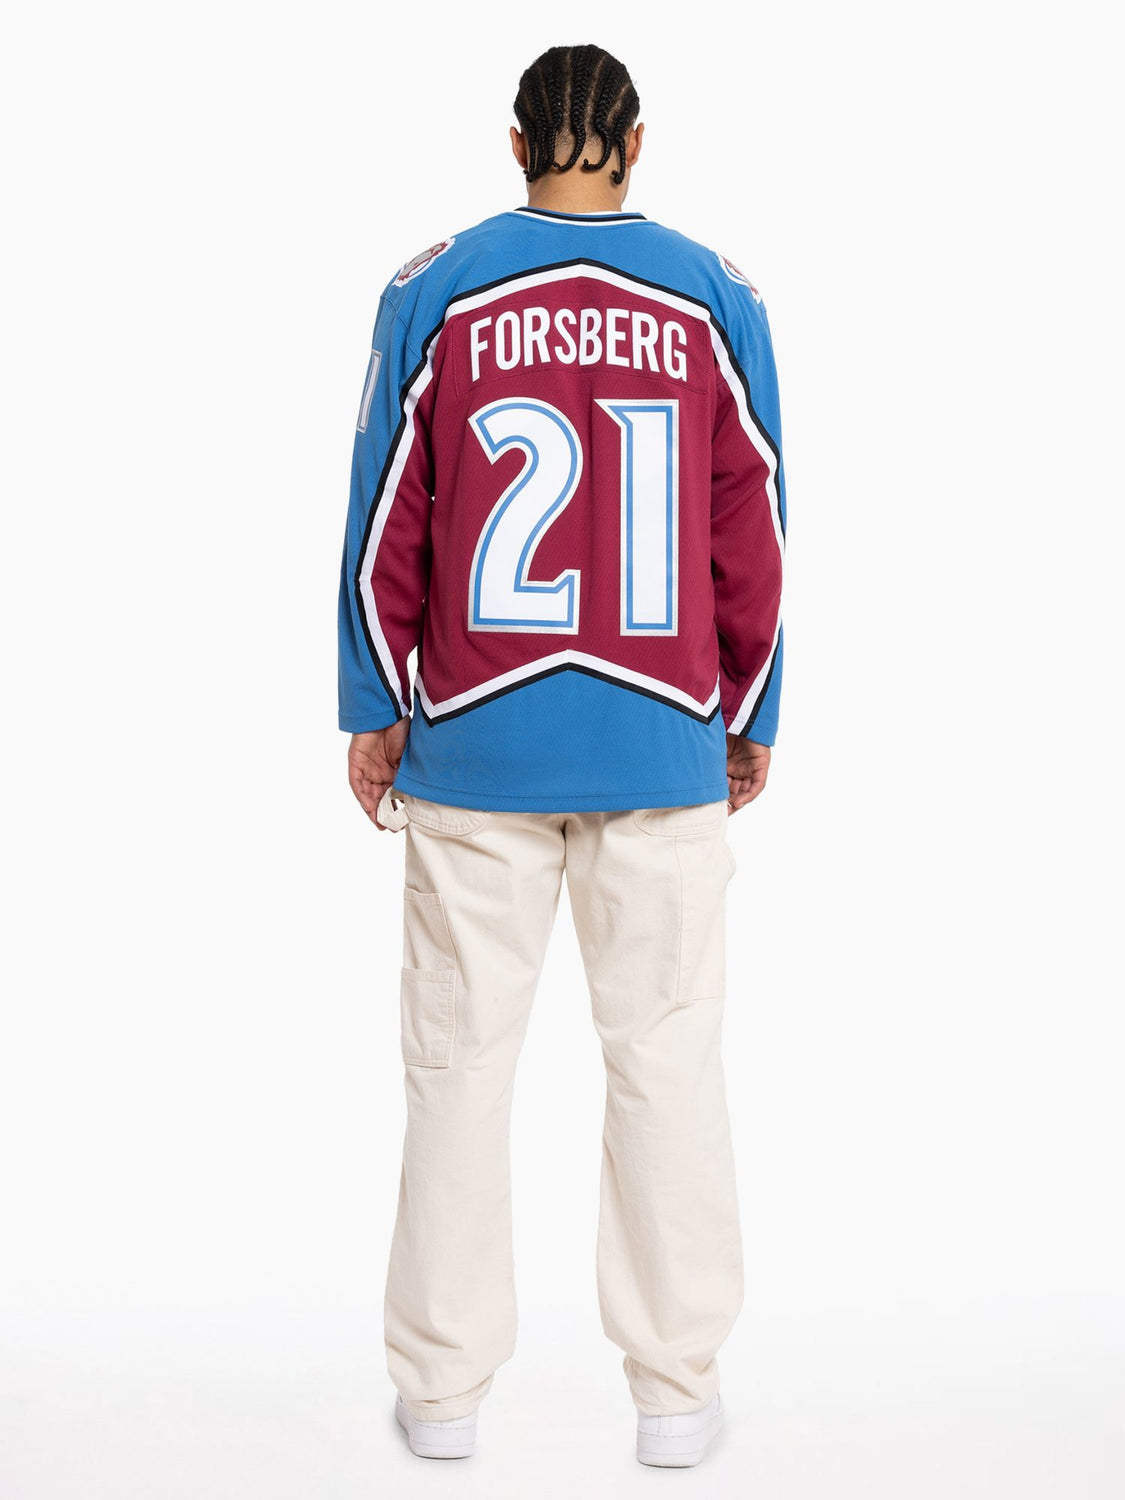 Colorado Avalanche 1995-96 jersey artwork, This is a highly…